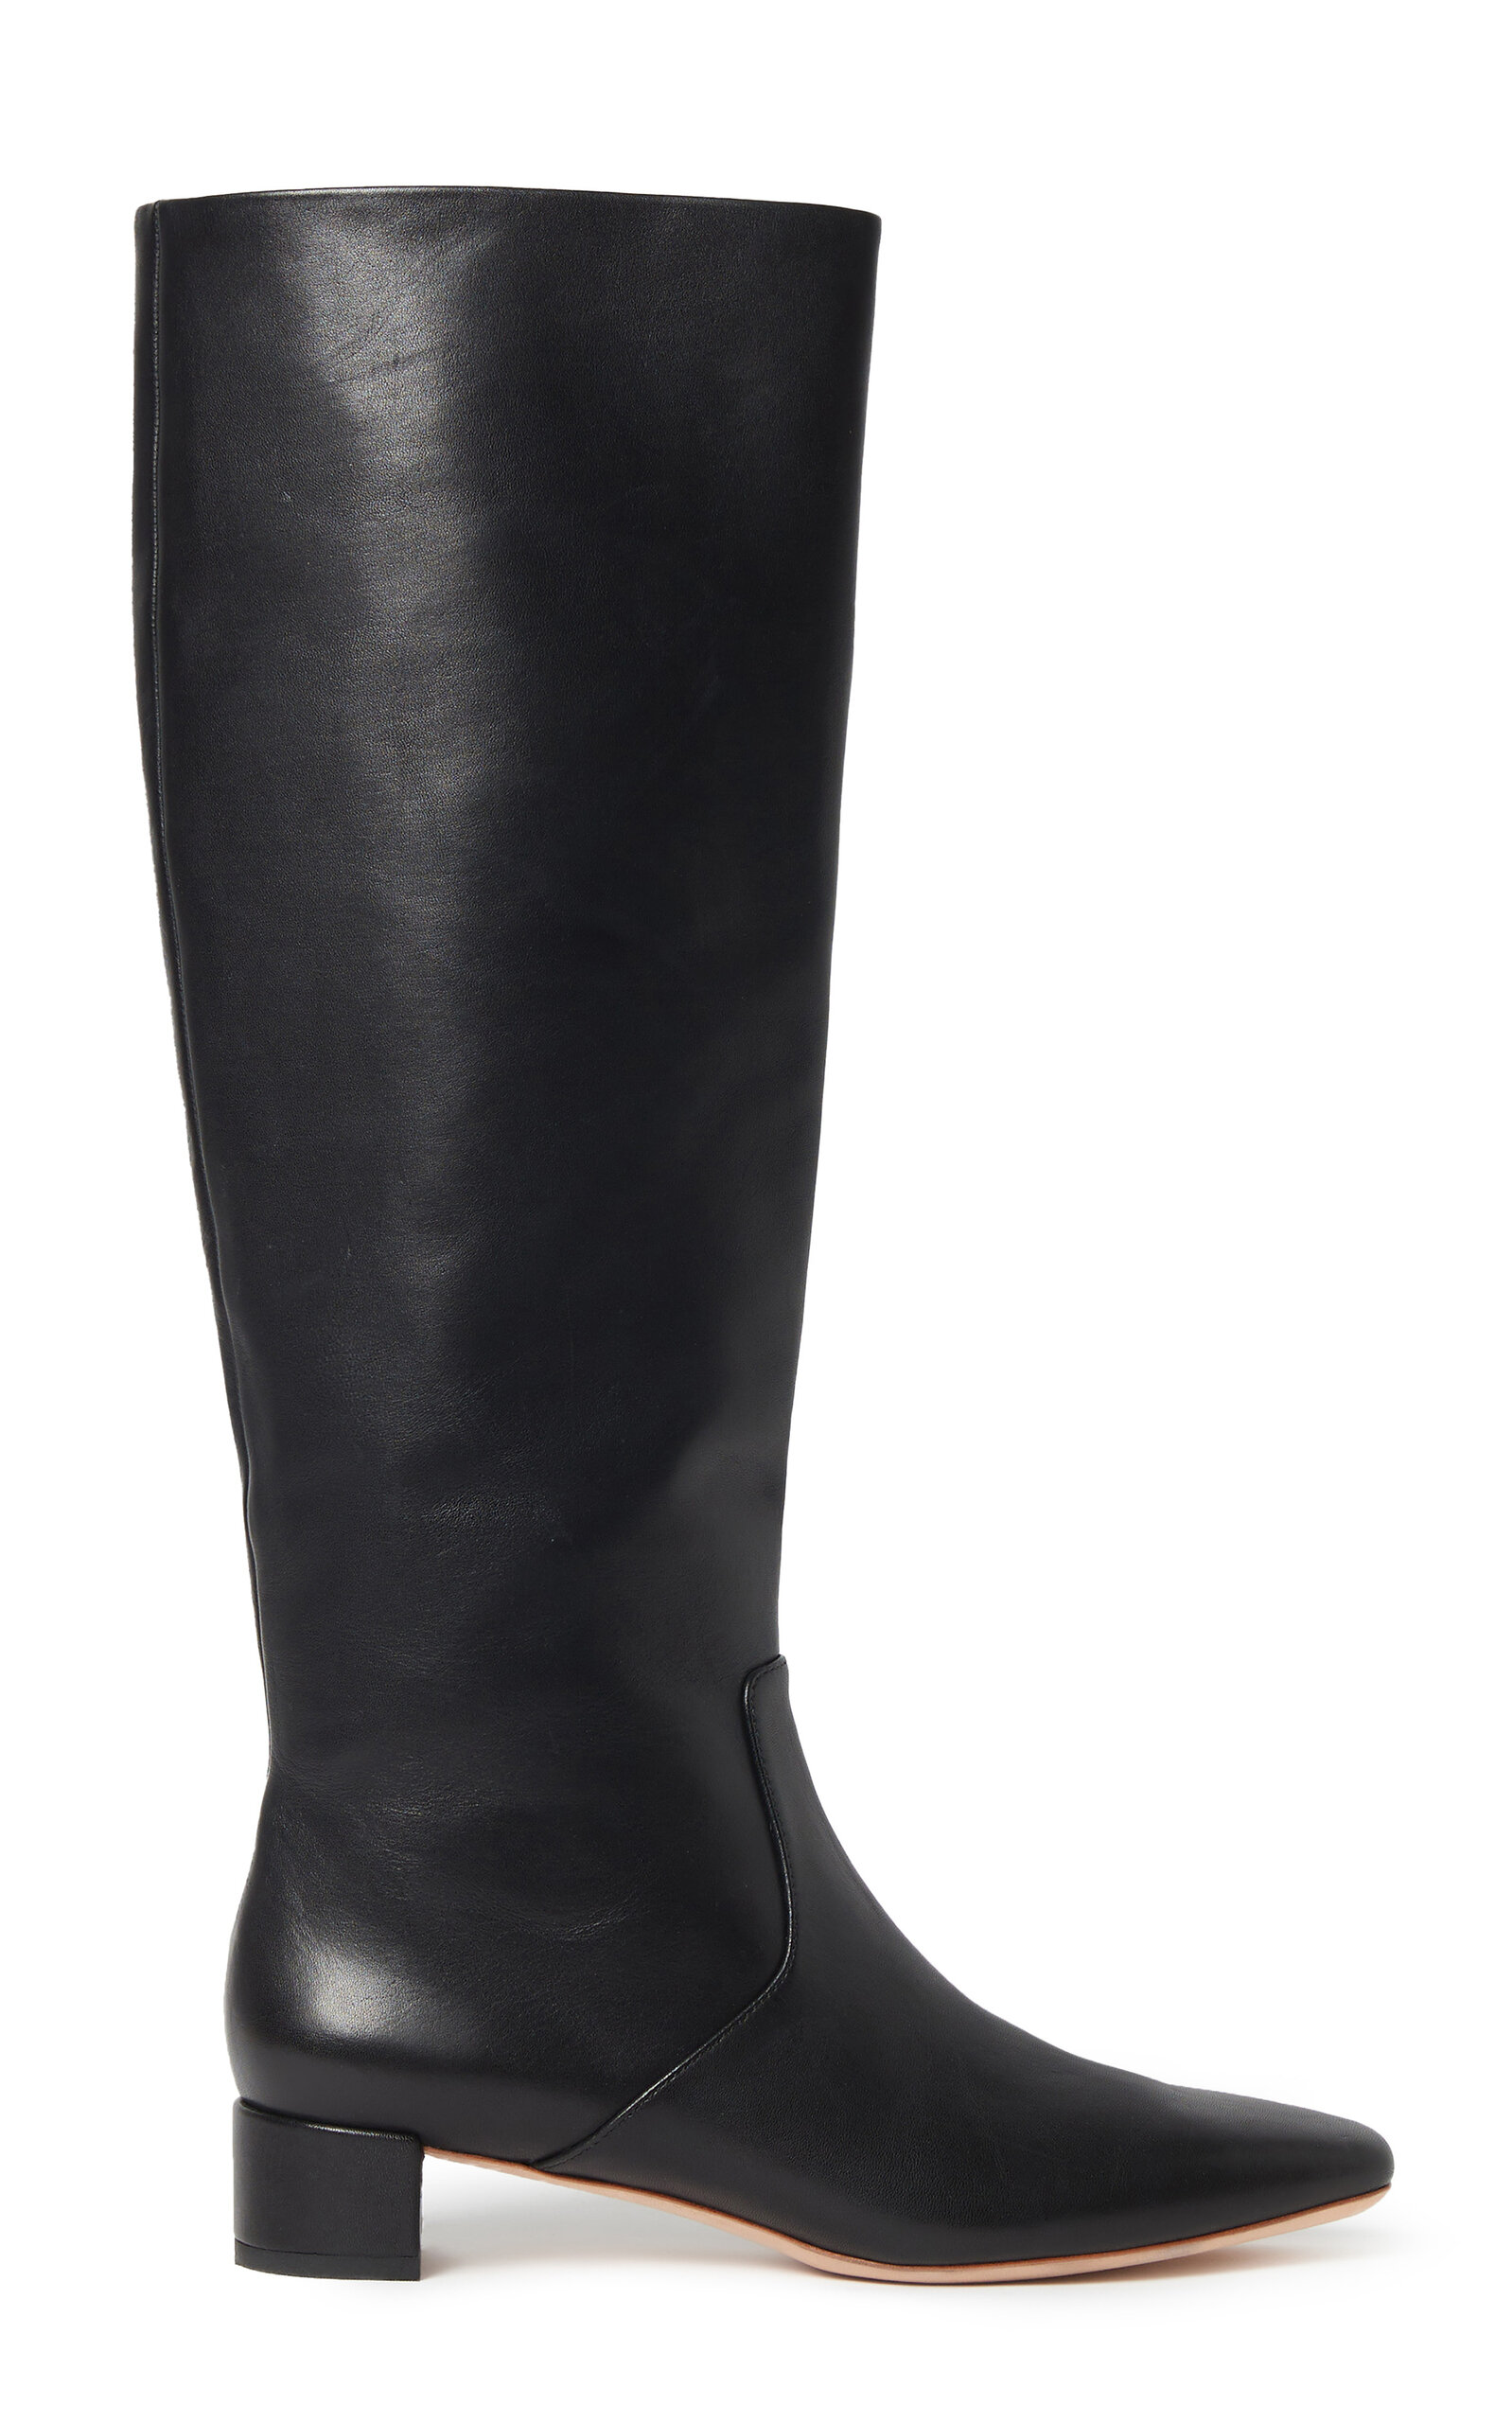 LOEFFLER RANDALL INDY LEATHER KNEE BOOTS